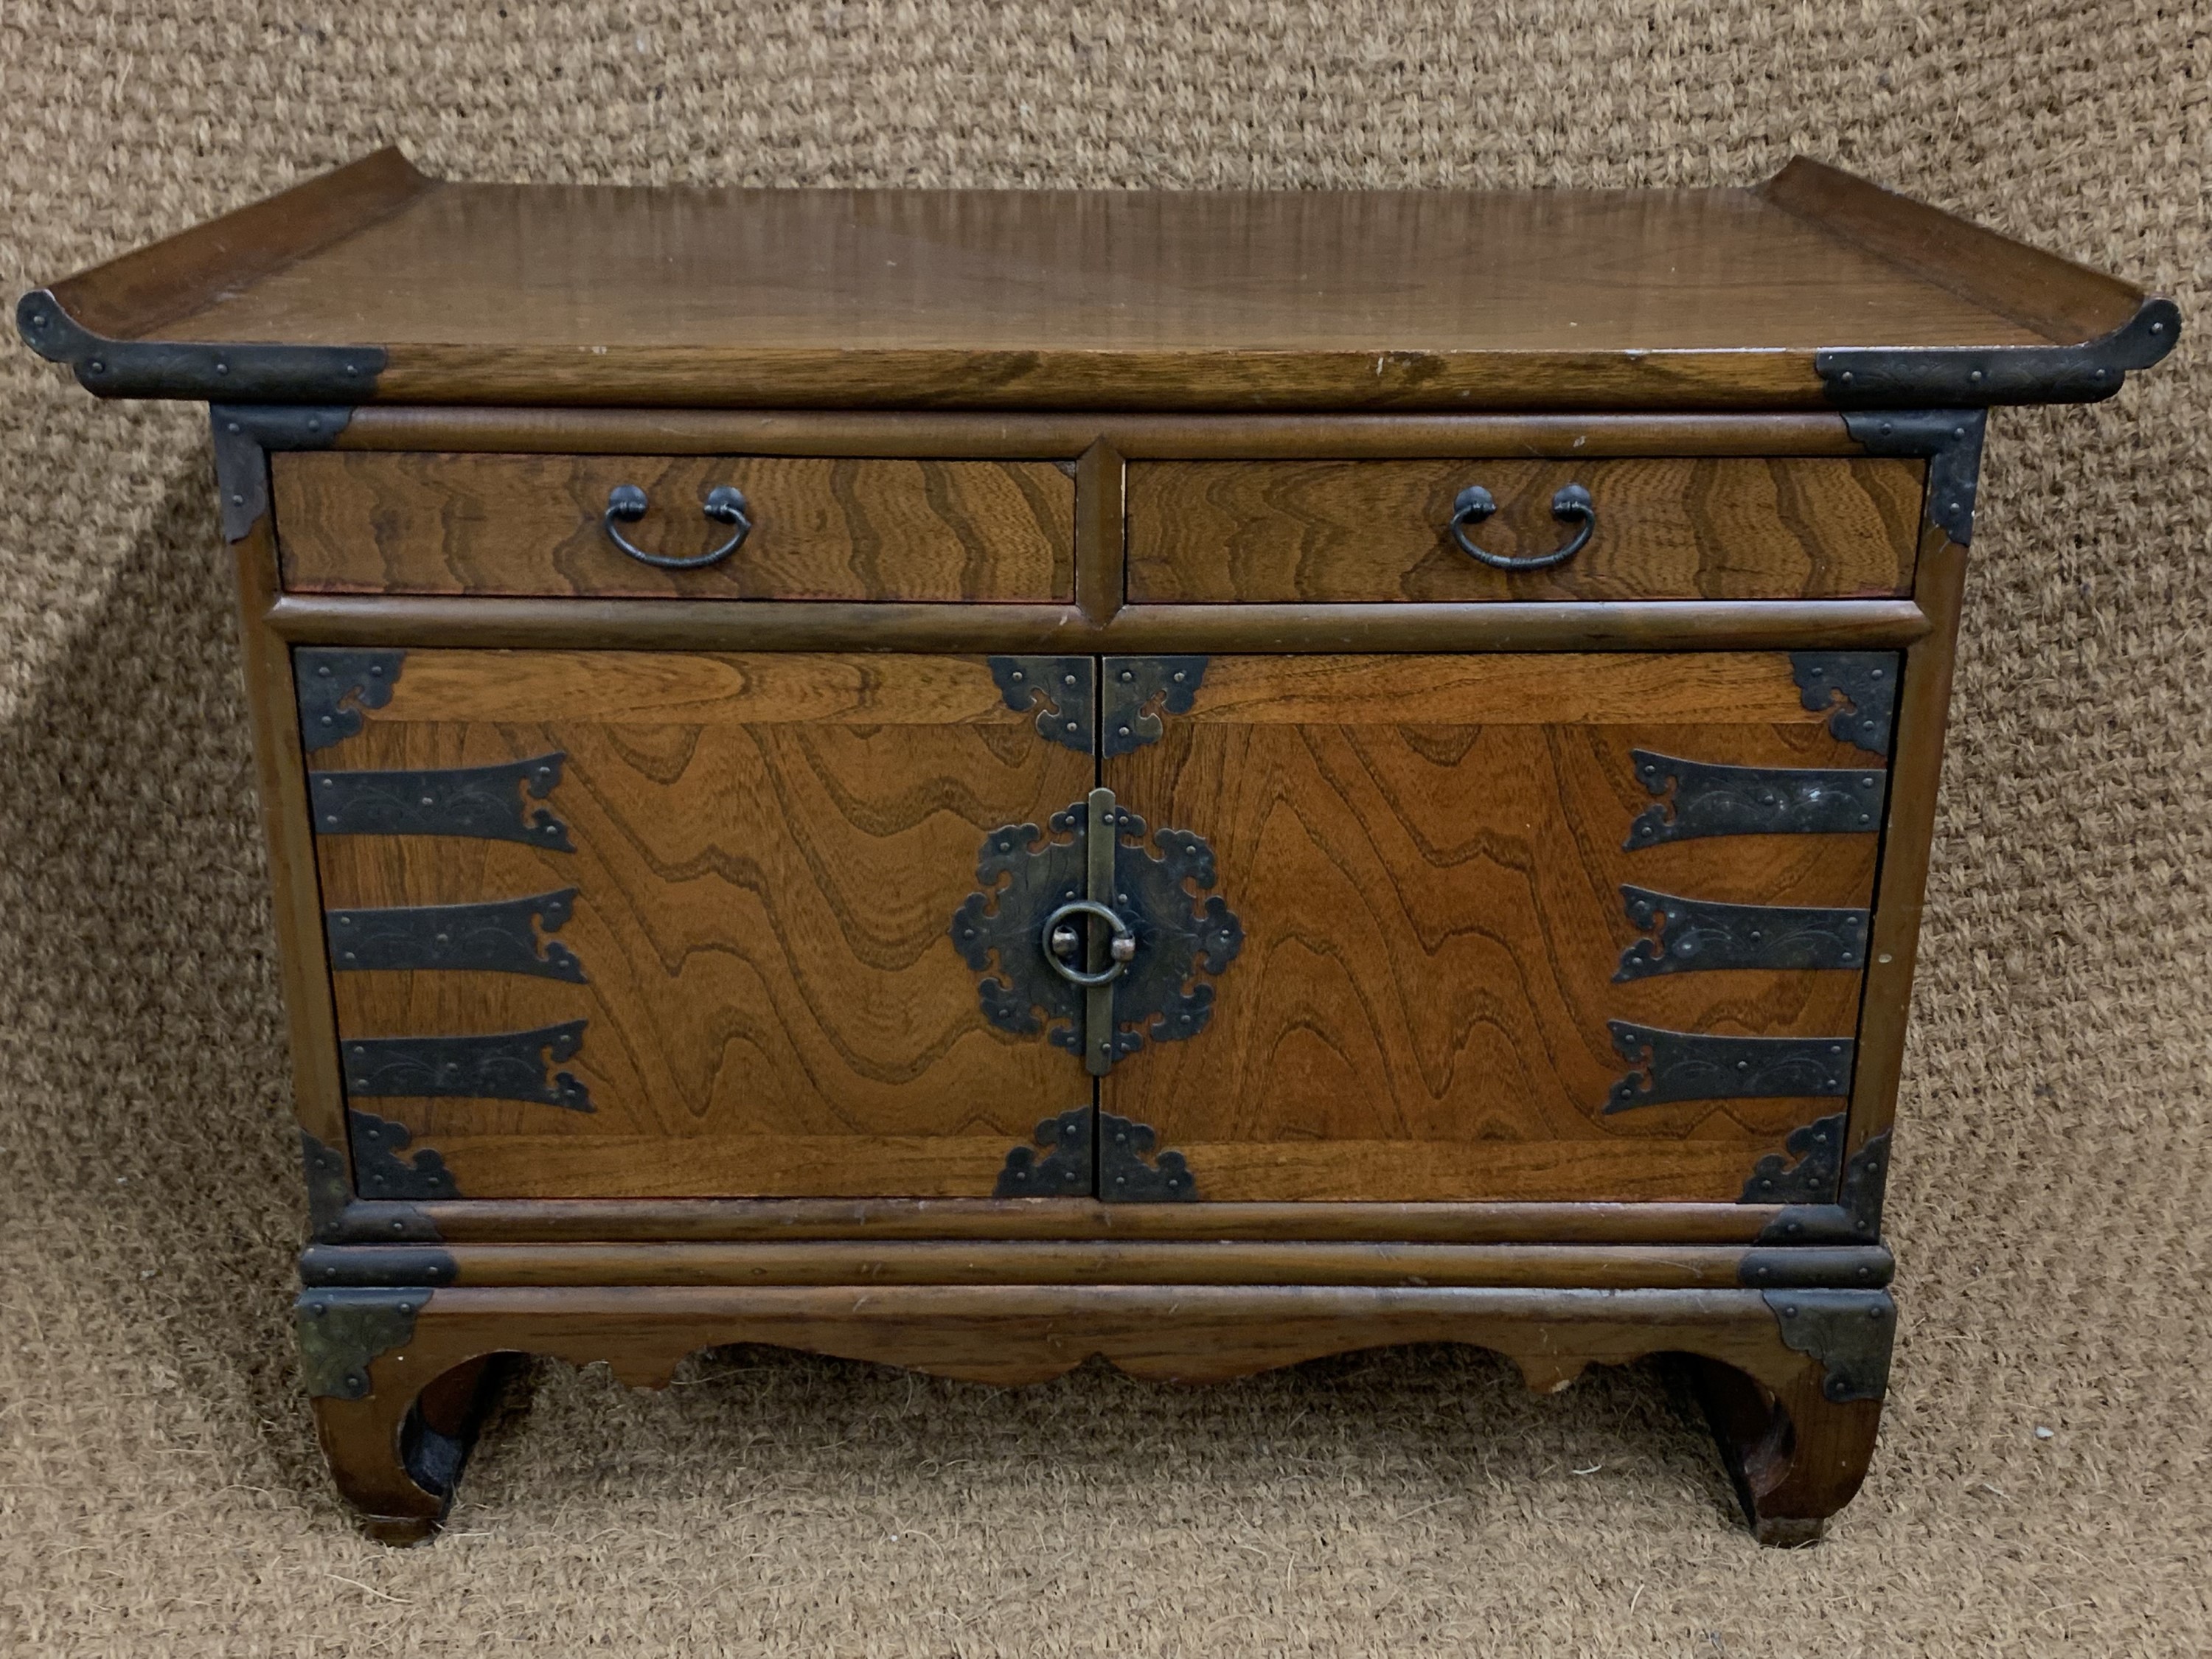 A Chinese brass-mounted hardwood cabinet, 76.5 cm x 47 cm x 55 cm.